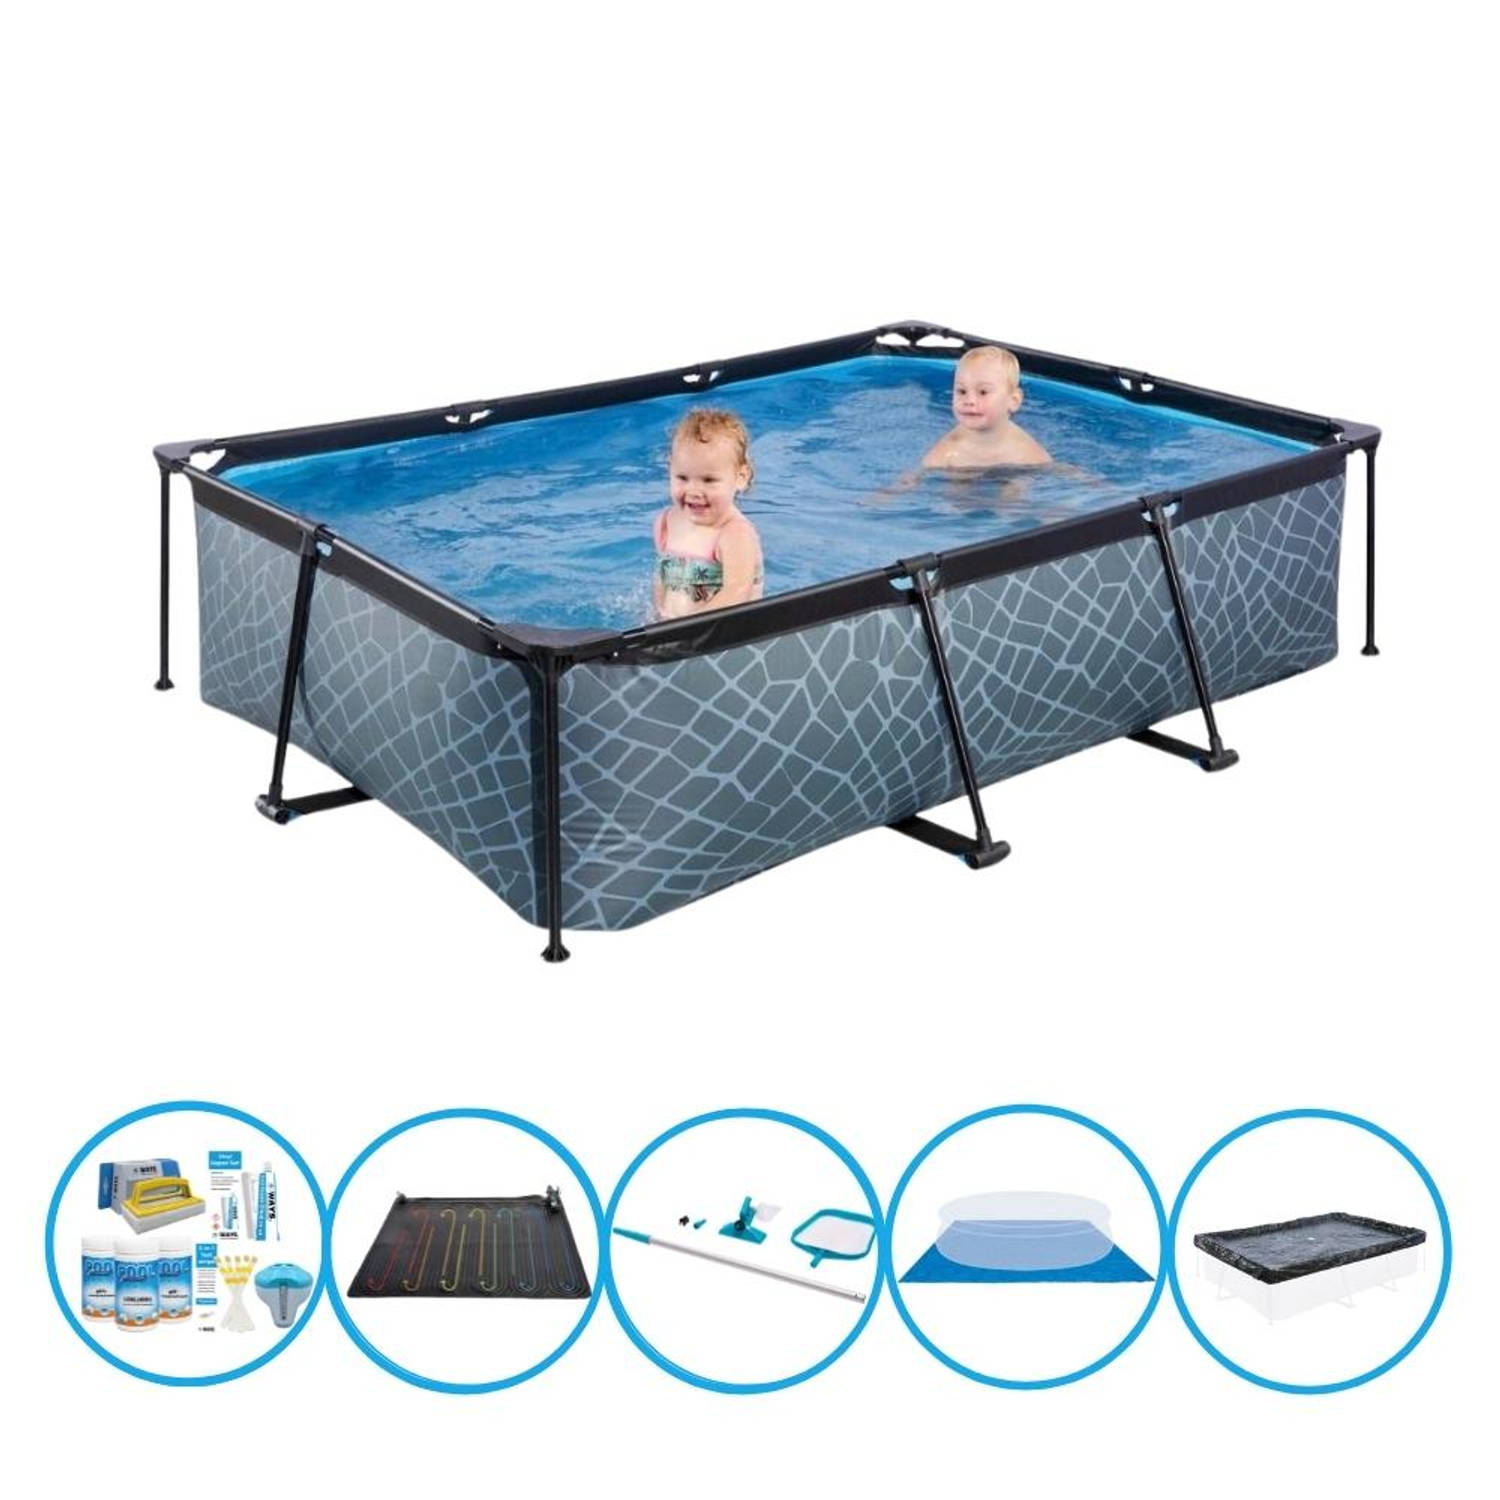 EXIT Zwembad Stone Grey - Frame Pool 220x150x60 cm - Inclusief accessoires